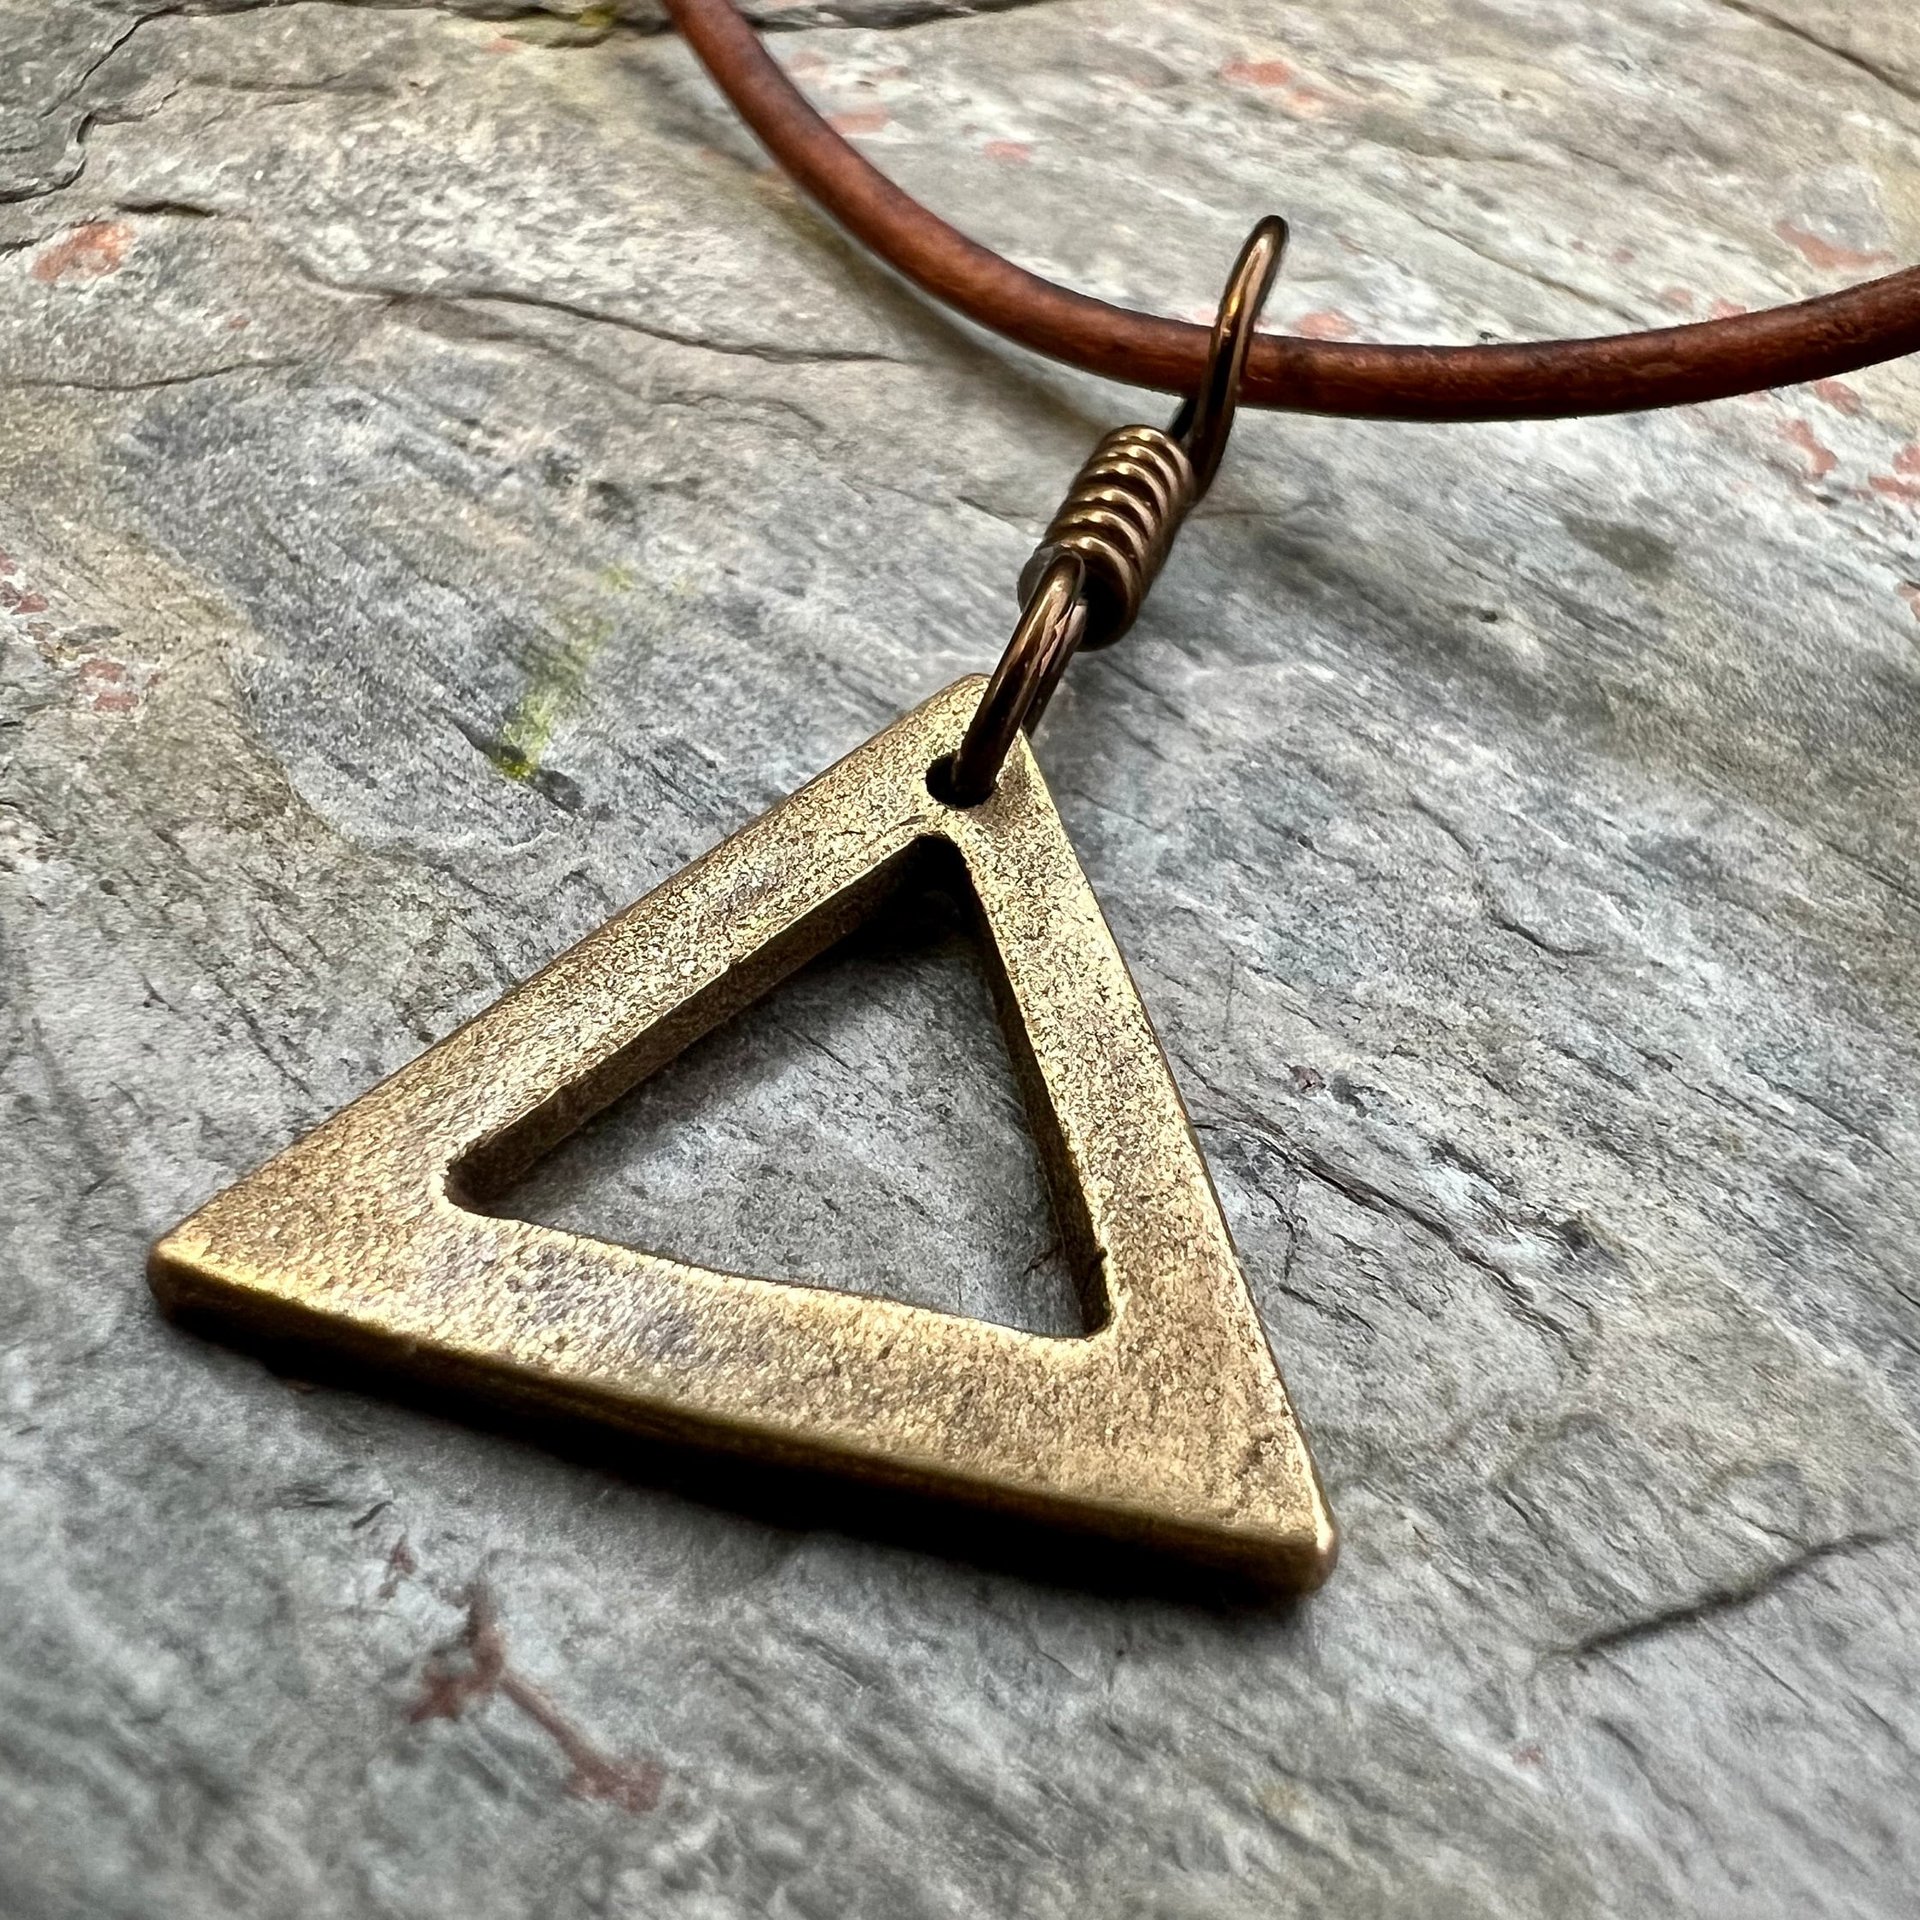 Fire Element, Bronze Elemental Signs, Pagan Witch Gift, Astrological Signs, Aries, Leo, Sagittarius, Summer, Elemental Symbols, South